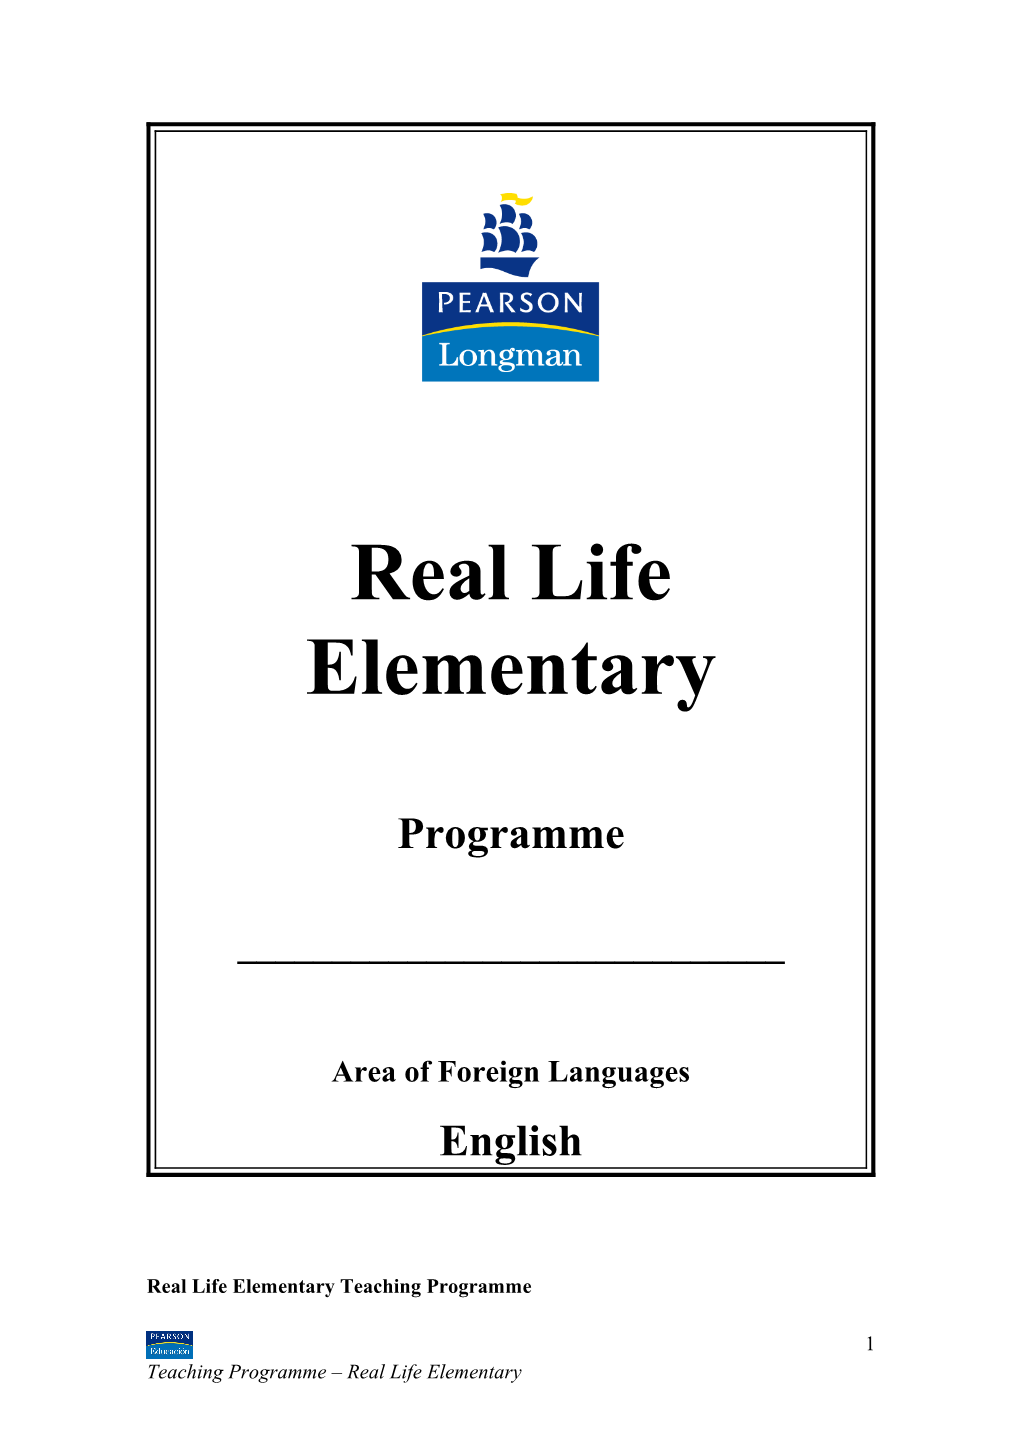 Real Life Elementary Teaching Programme